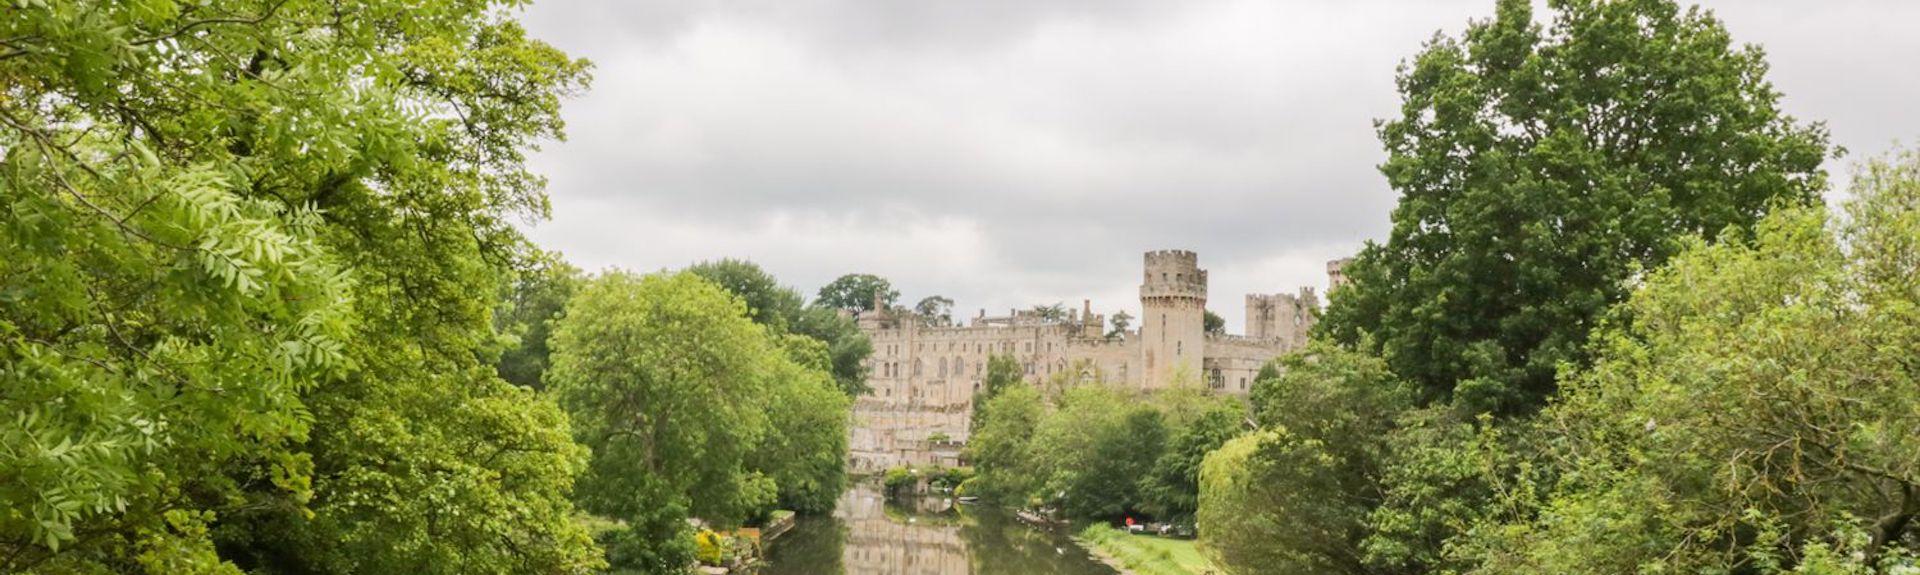 The wide River Avon flows placidly between tree-lined banks towards Warwick Castle 